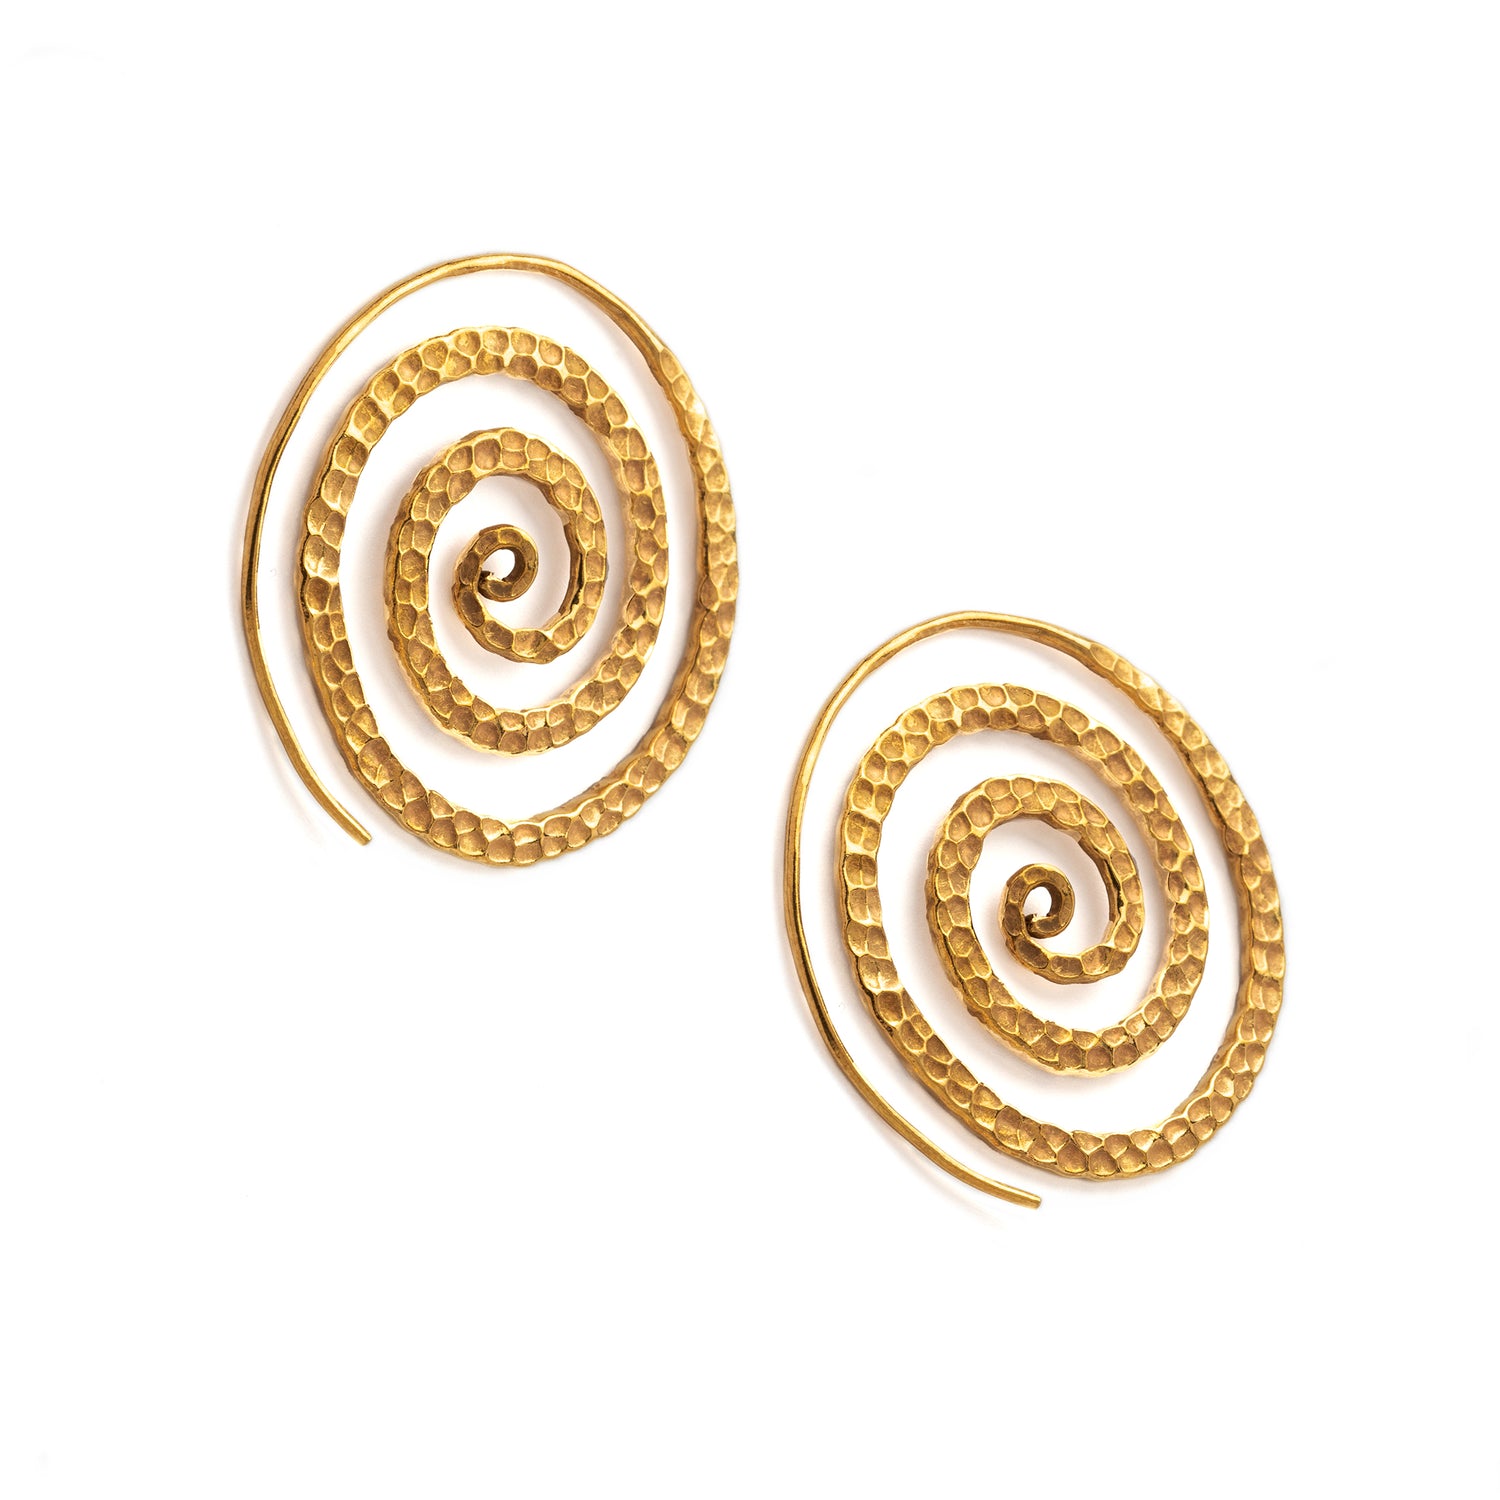  Gold Hammered Spiral Earrings side view